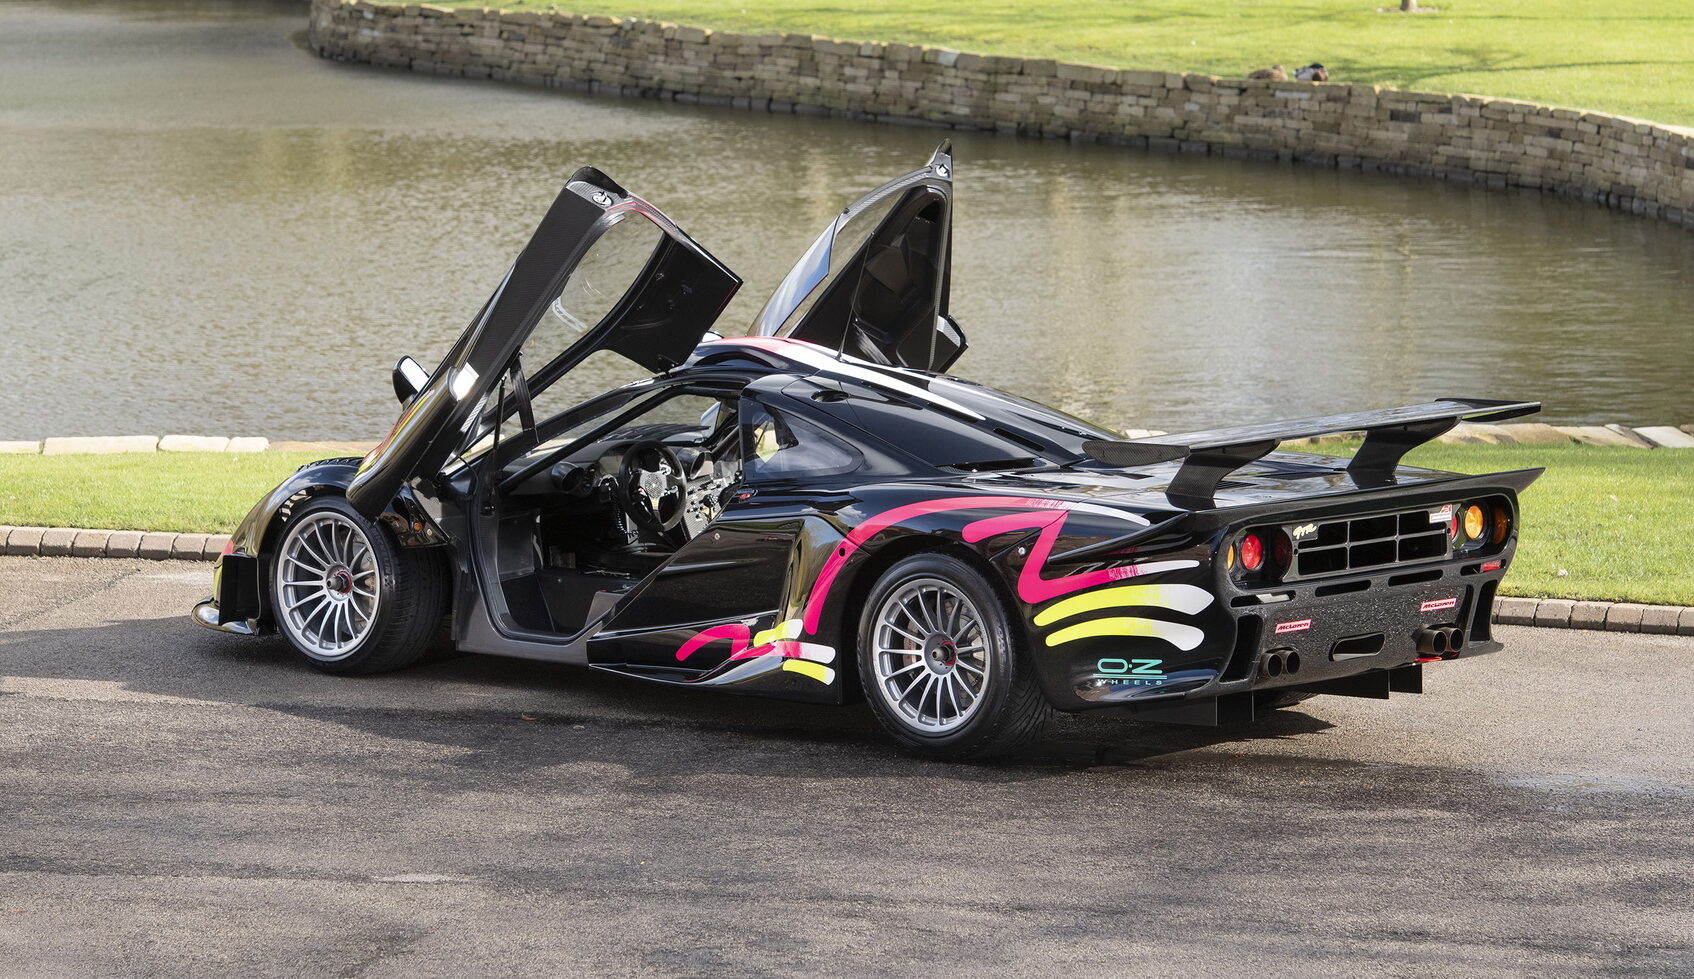 There is nothing that matches the existence of such a legitimate McLaren F1 GTR Longtail